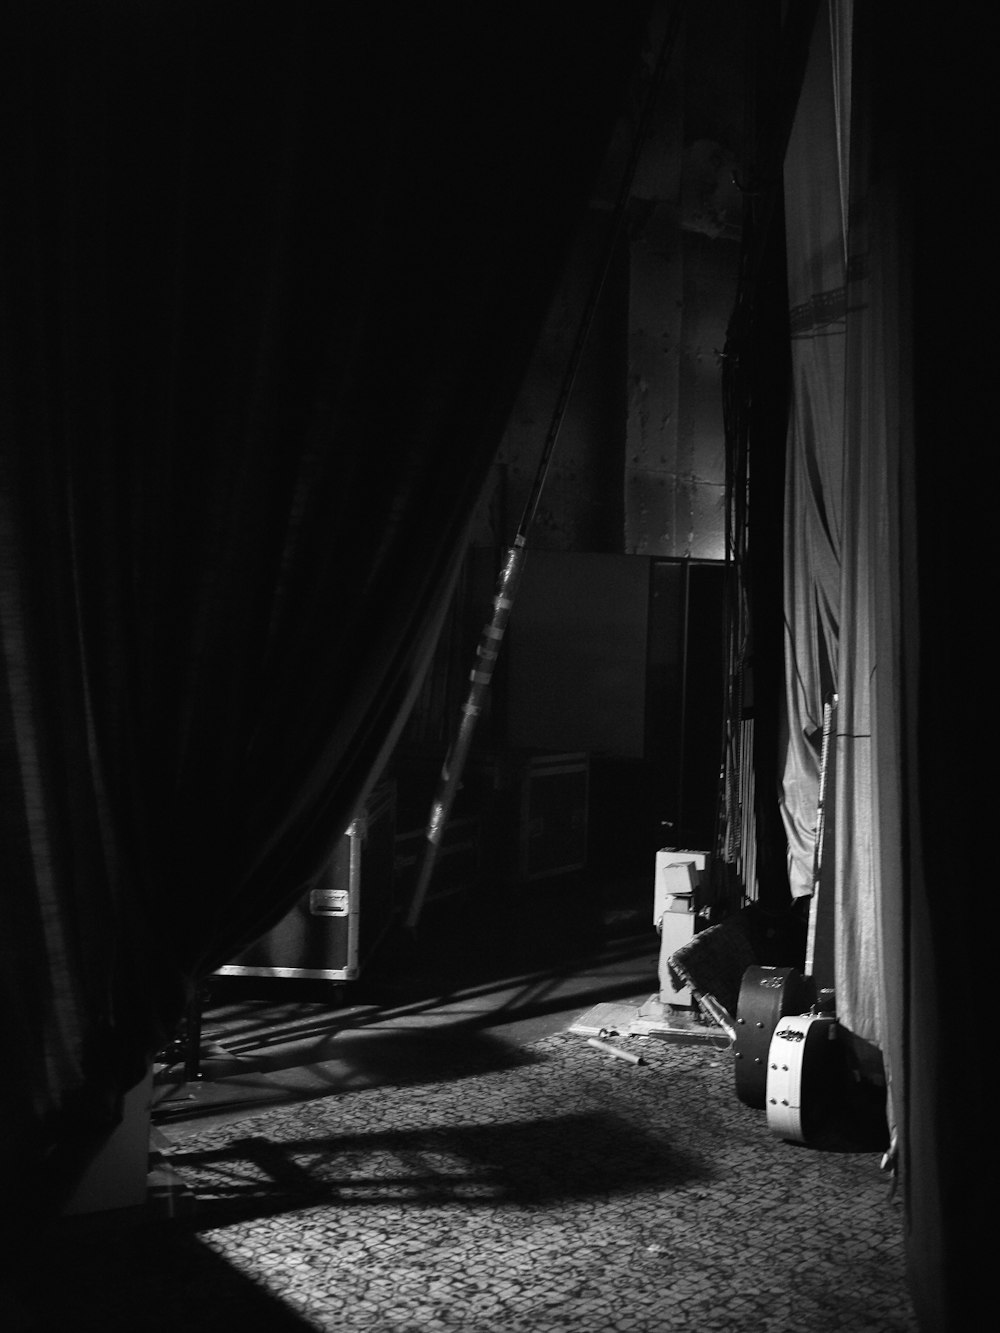 a black and white photo of a room with curtains